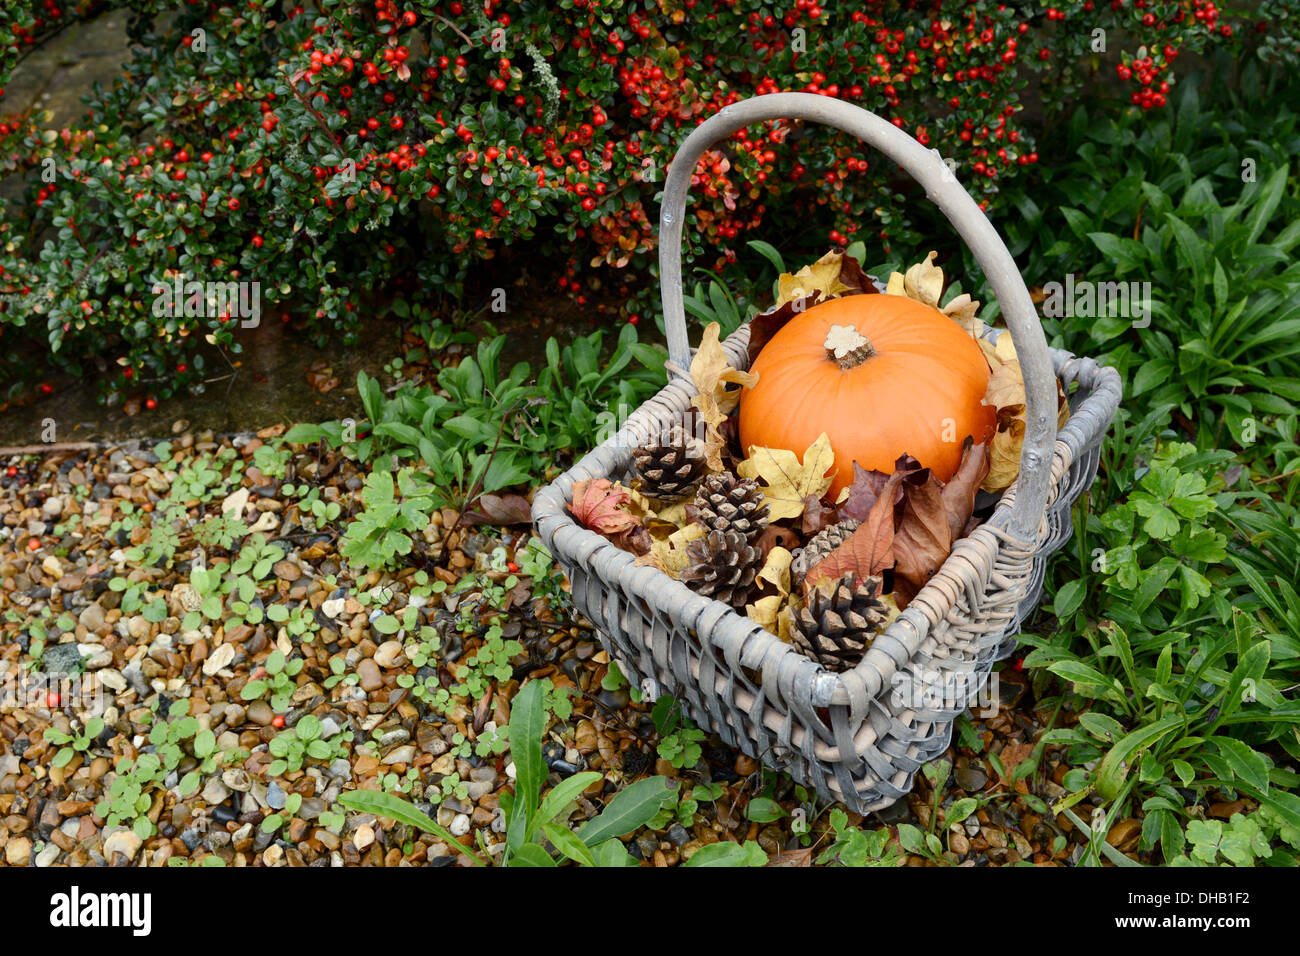 Fall-themed basket with pumpkin, fir cones and leaves against red cotoneaster berries Stock Photo